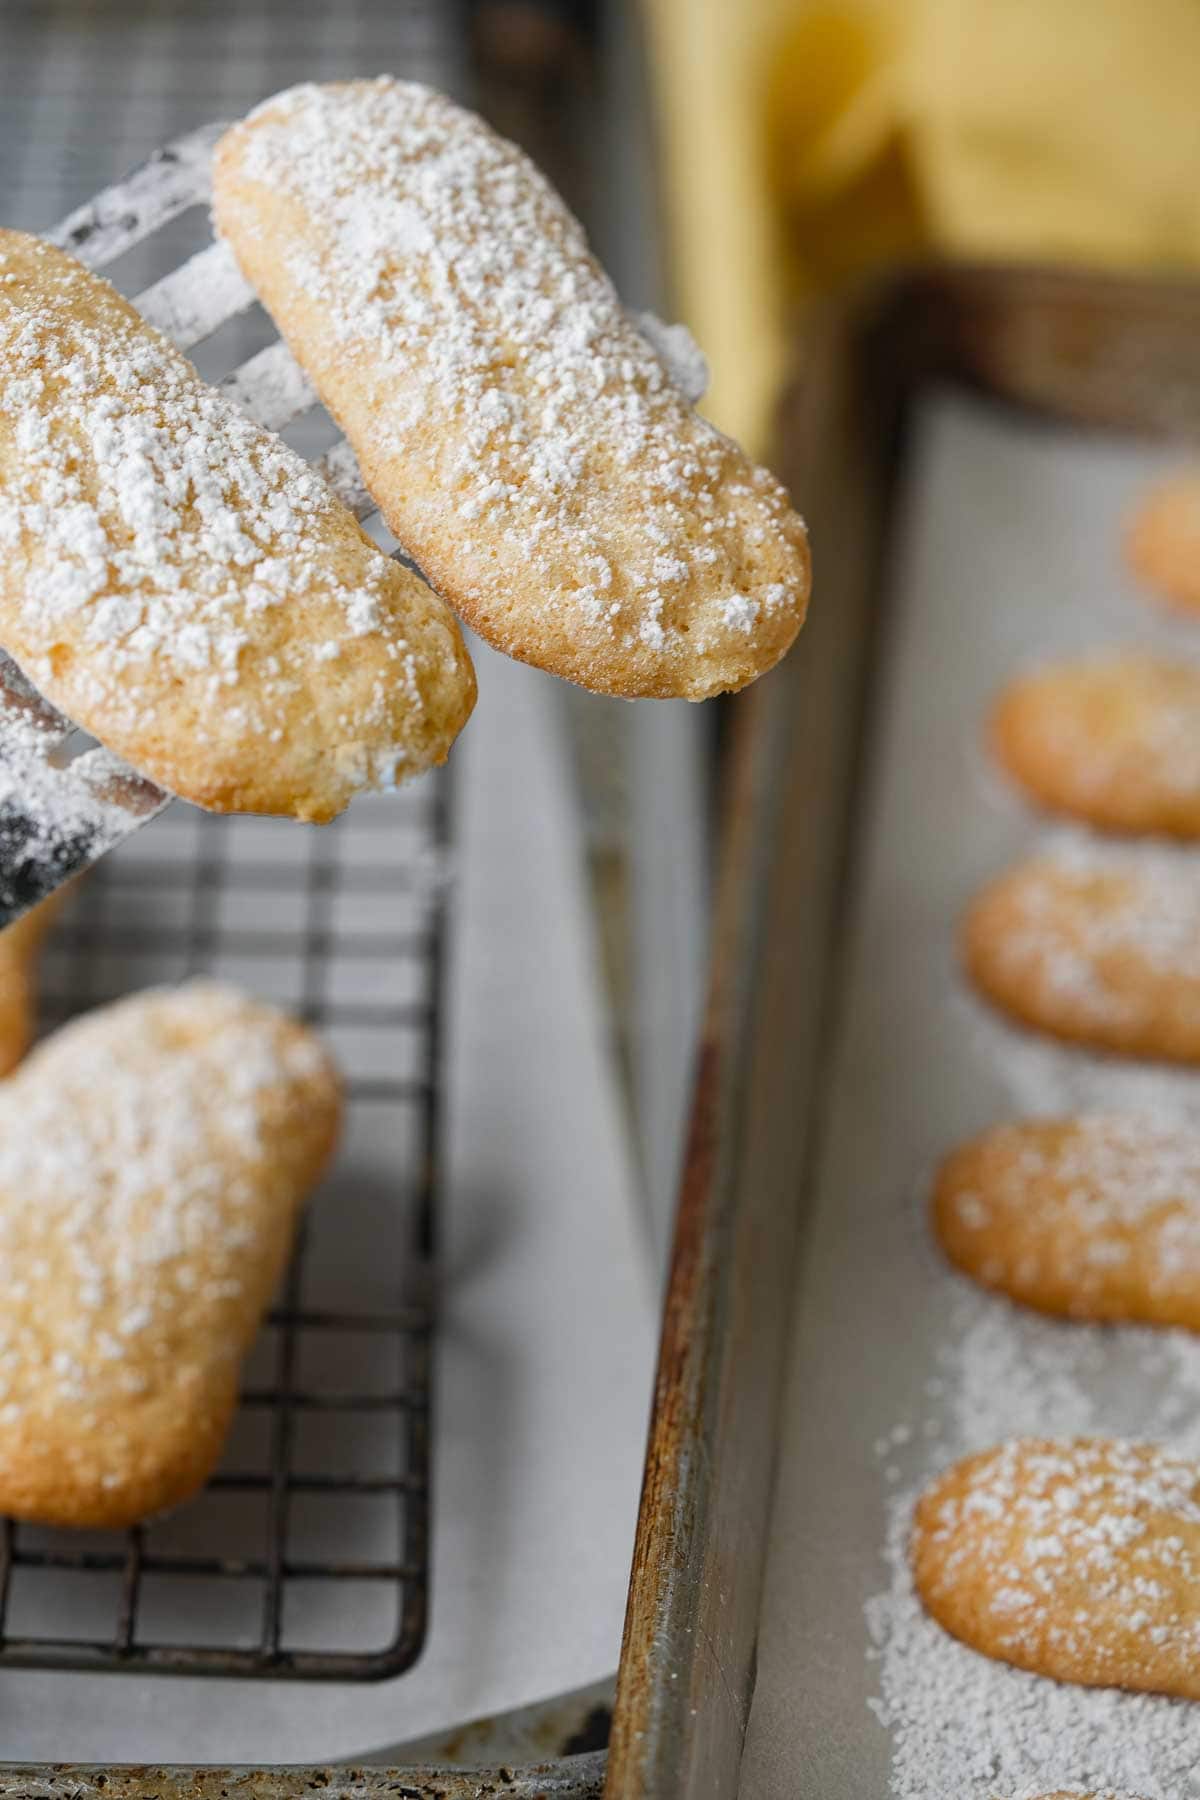 Powdered sugar coated vegan ladyfinger cookies being placed on a wire rack.